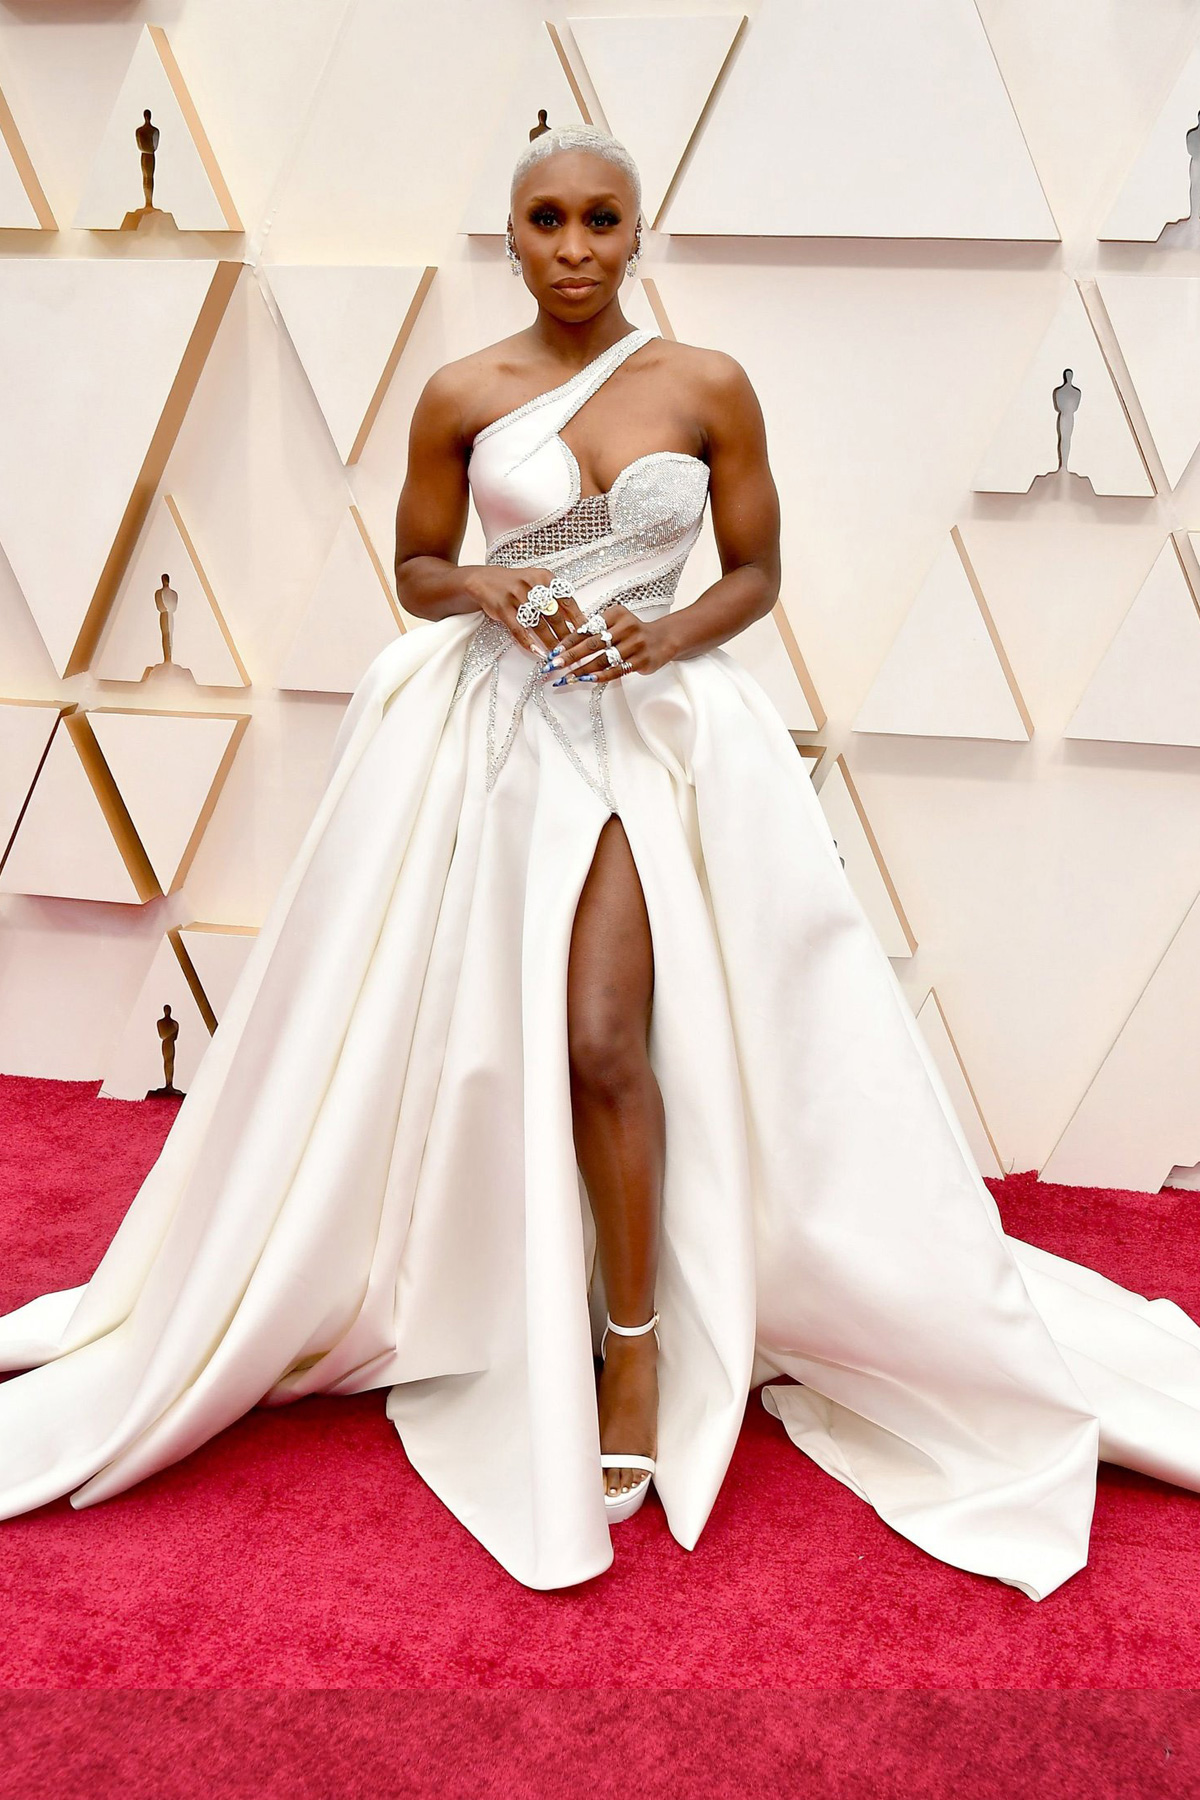 Cynthia Erivo in Atellier Versace. Getty Images / Sourced from Oscar.go.com